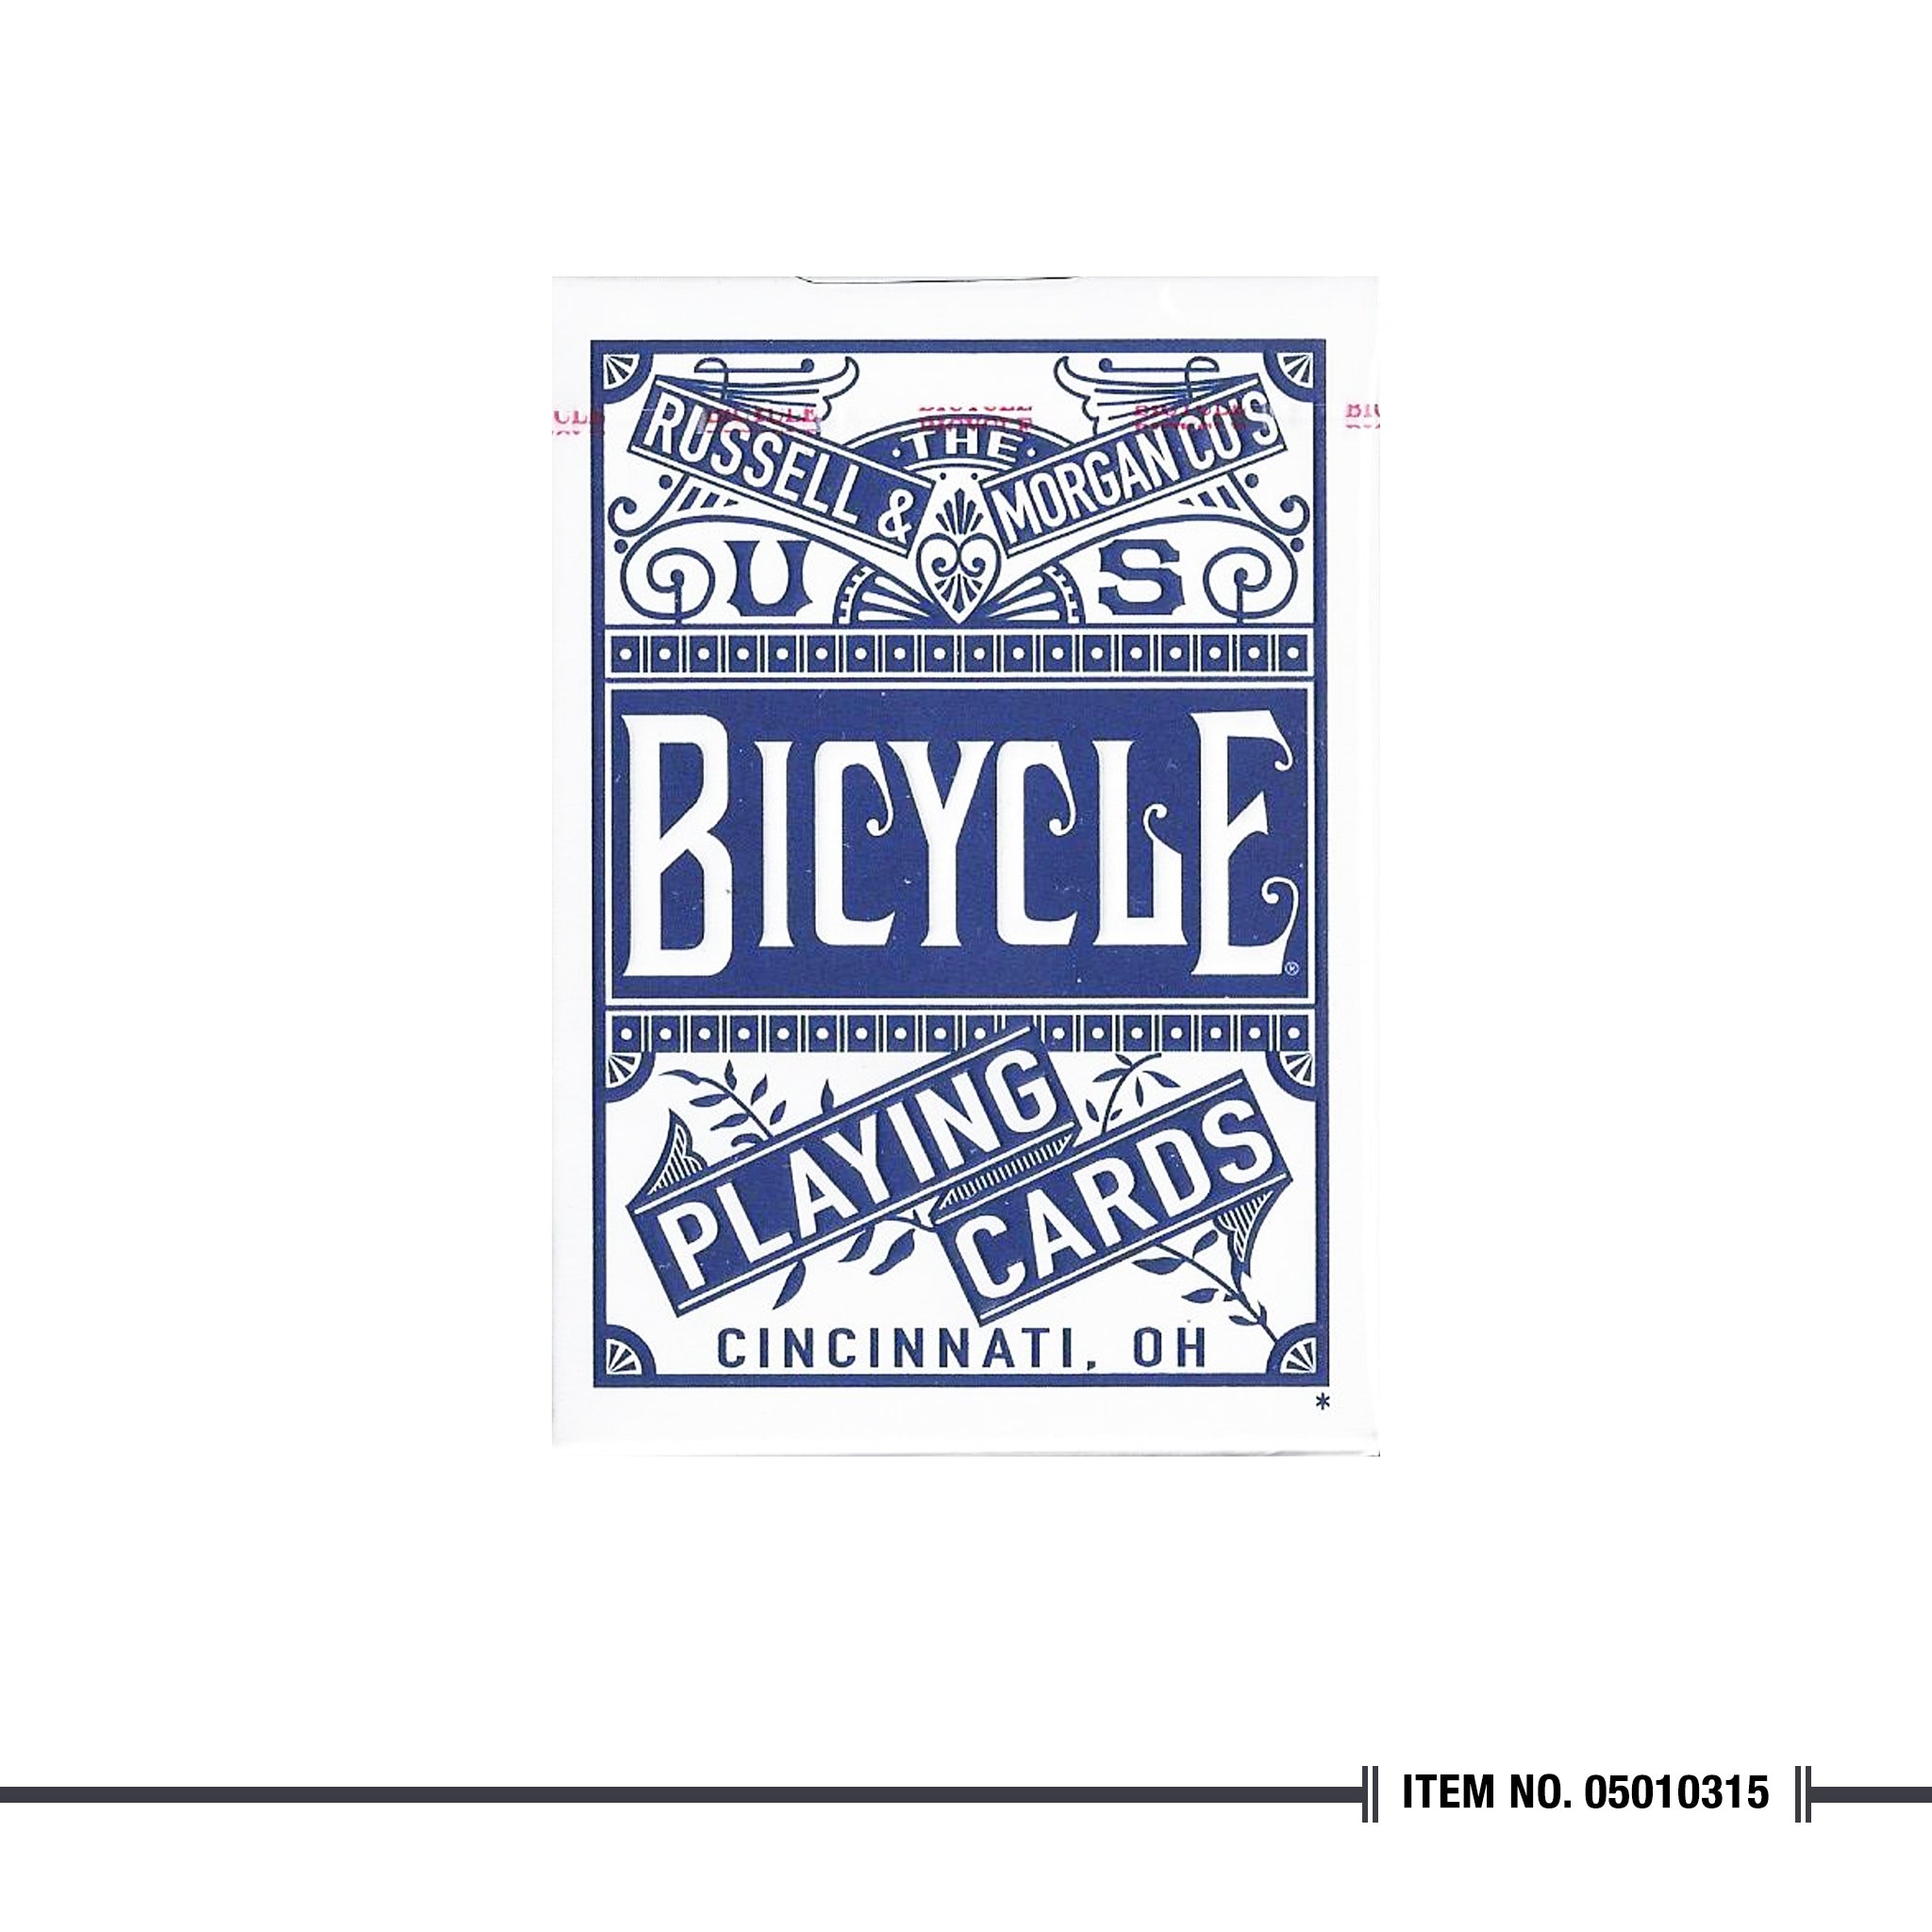 Bicycle® Chainless Playing Cards